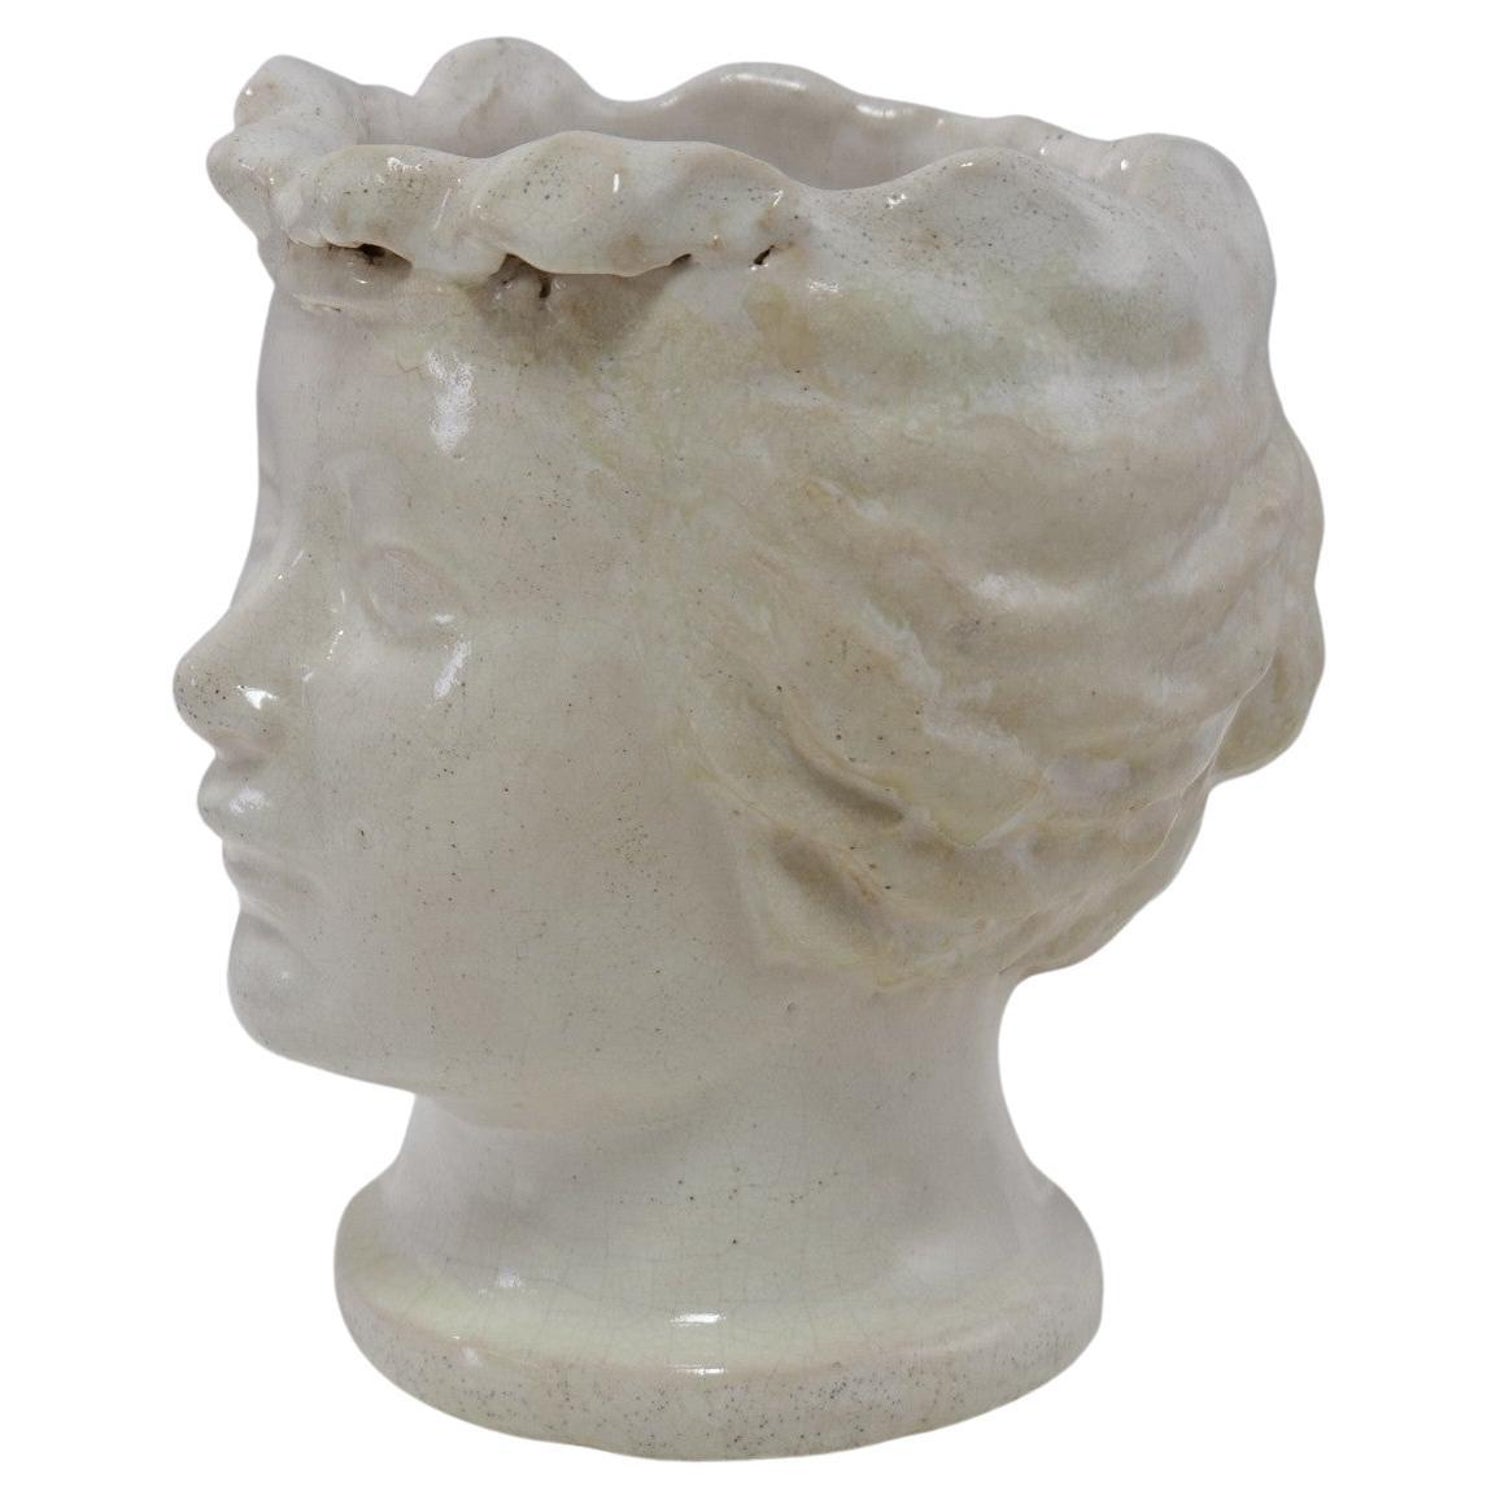 Bust Of Paris - 5 For Sale on 1stDibs